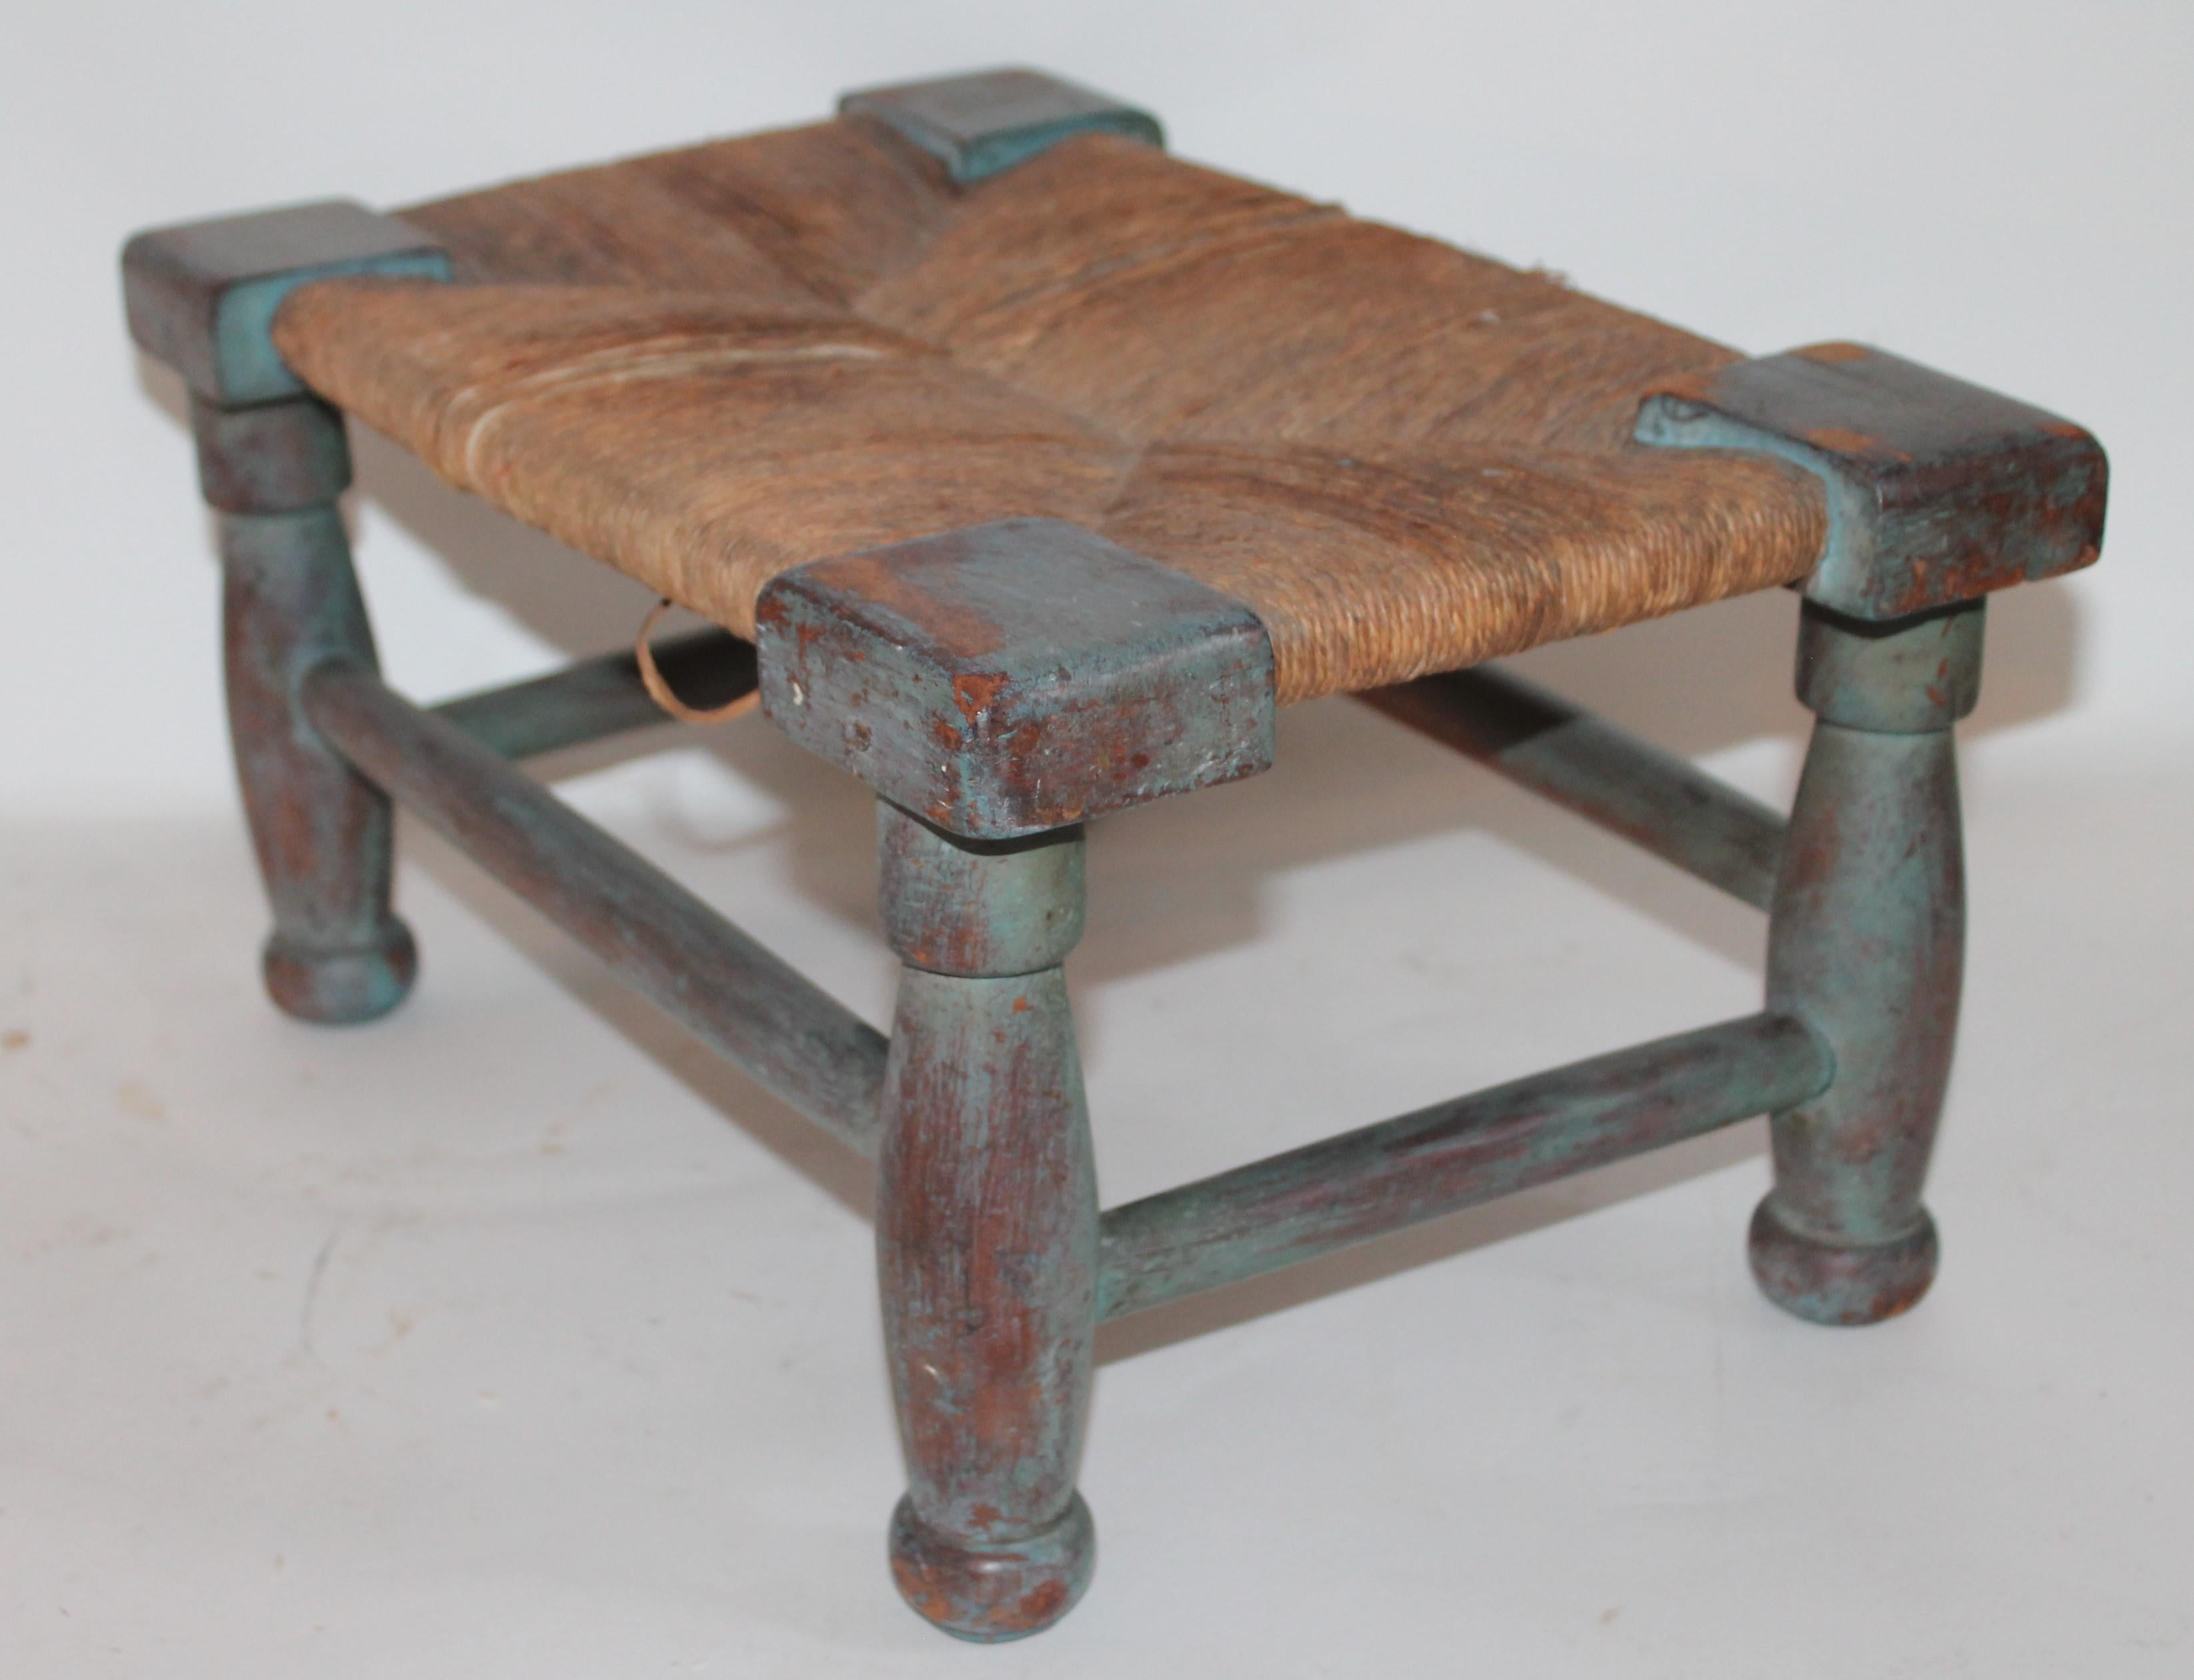 Amazing untouched robin egg blue painted 18th century handmade foot stool with the original handmade rush seat .This stool was found in the state of Maine .It is constructed of handcut nails and the best blue painted surface.